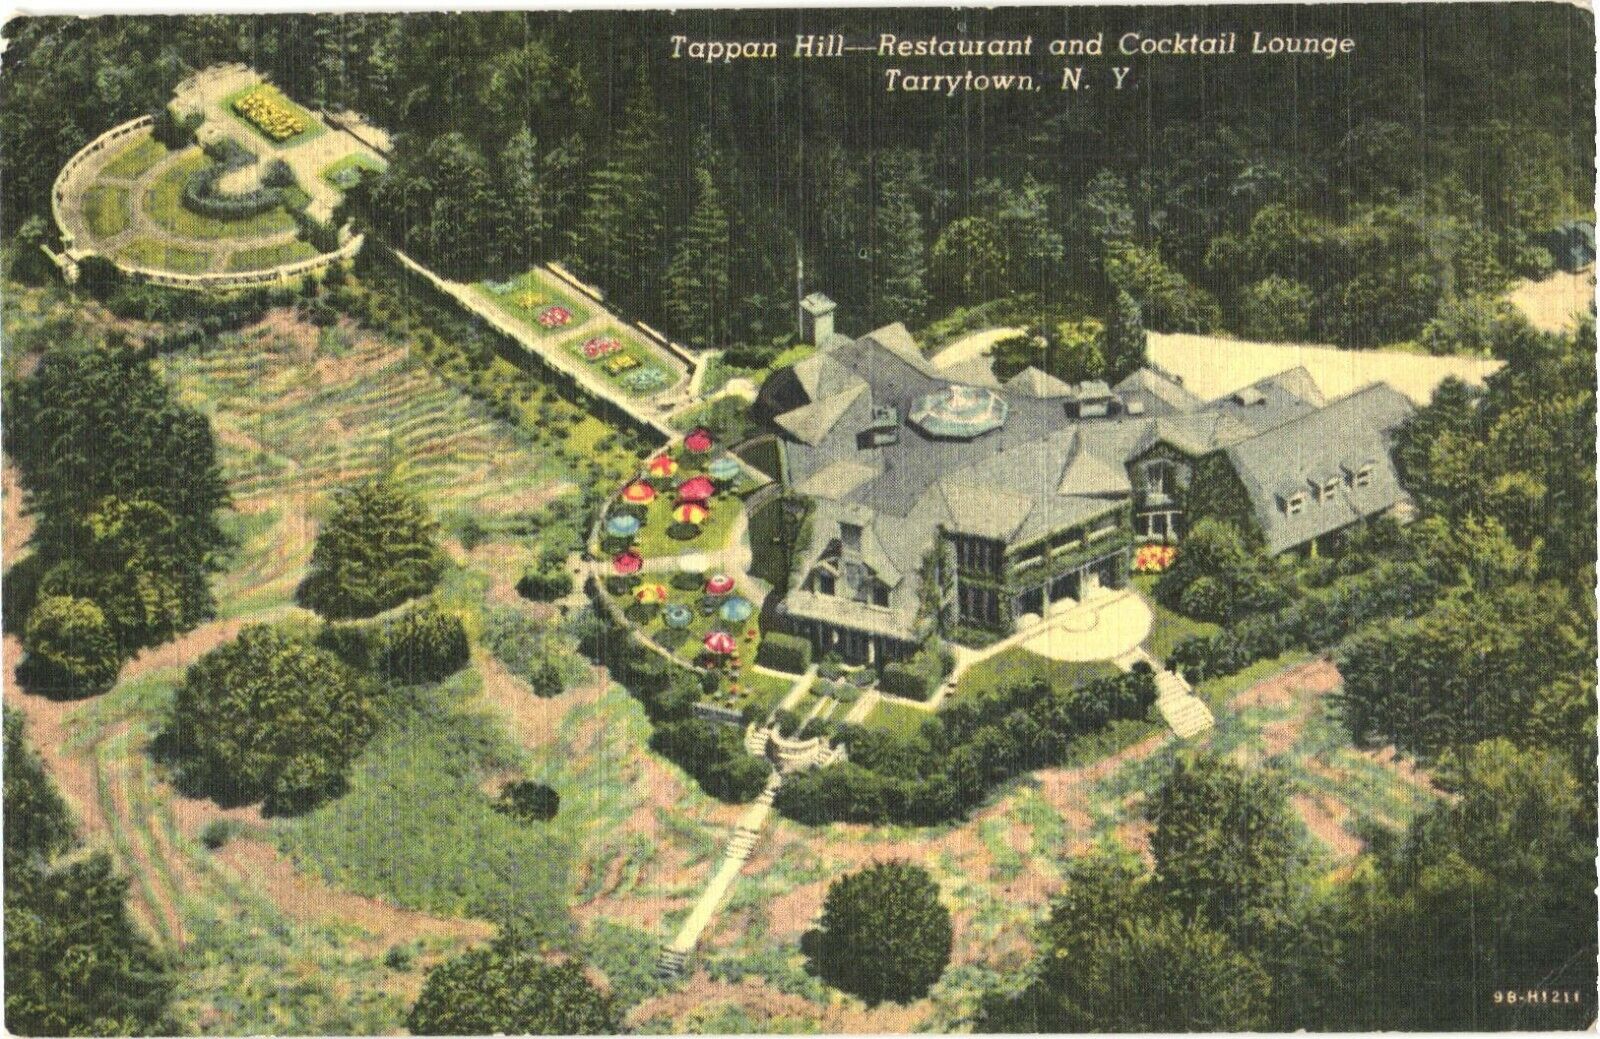 Tappan Hill, Restaurant And Cocktail Lounge, Tarrytown, New York Postcard